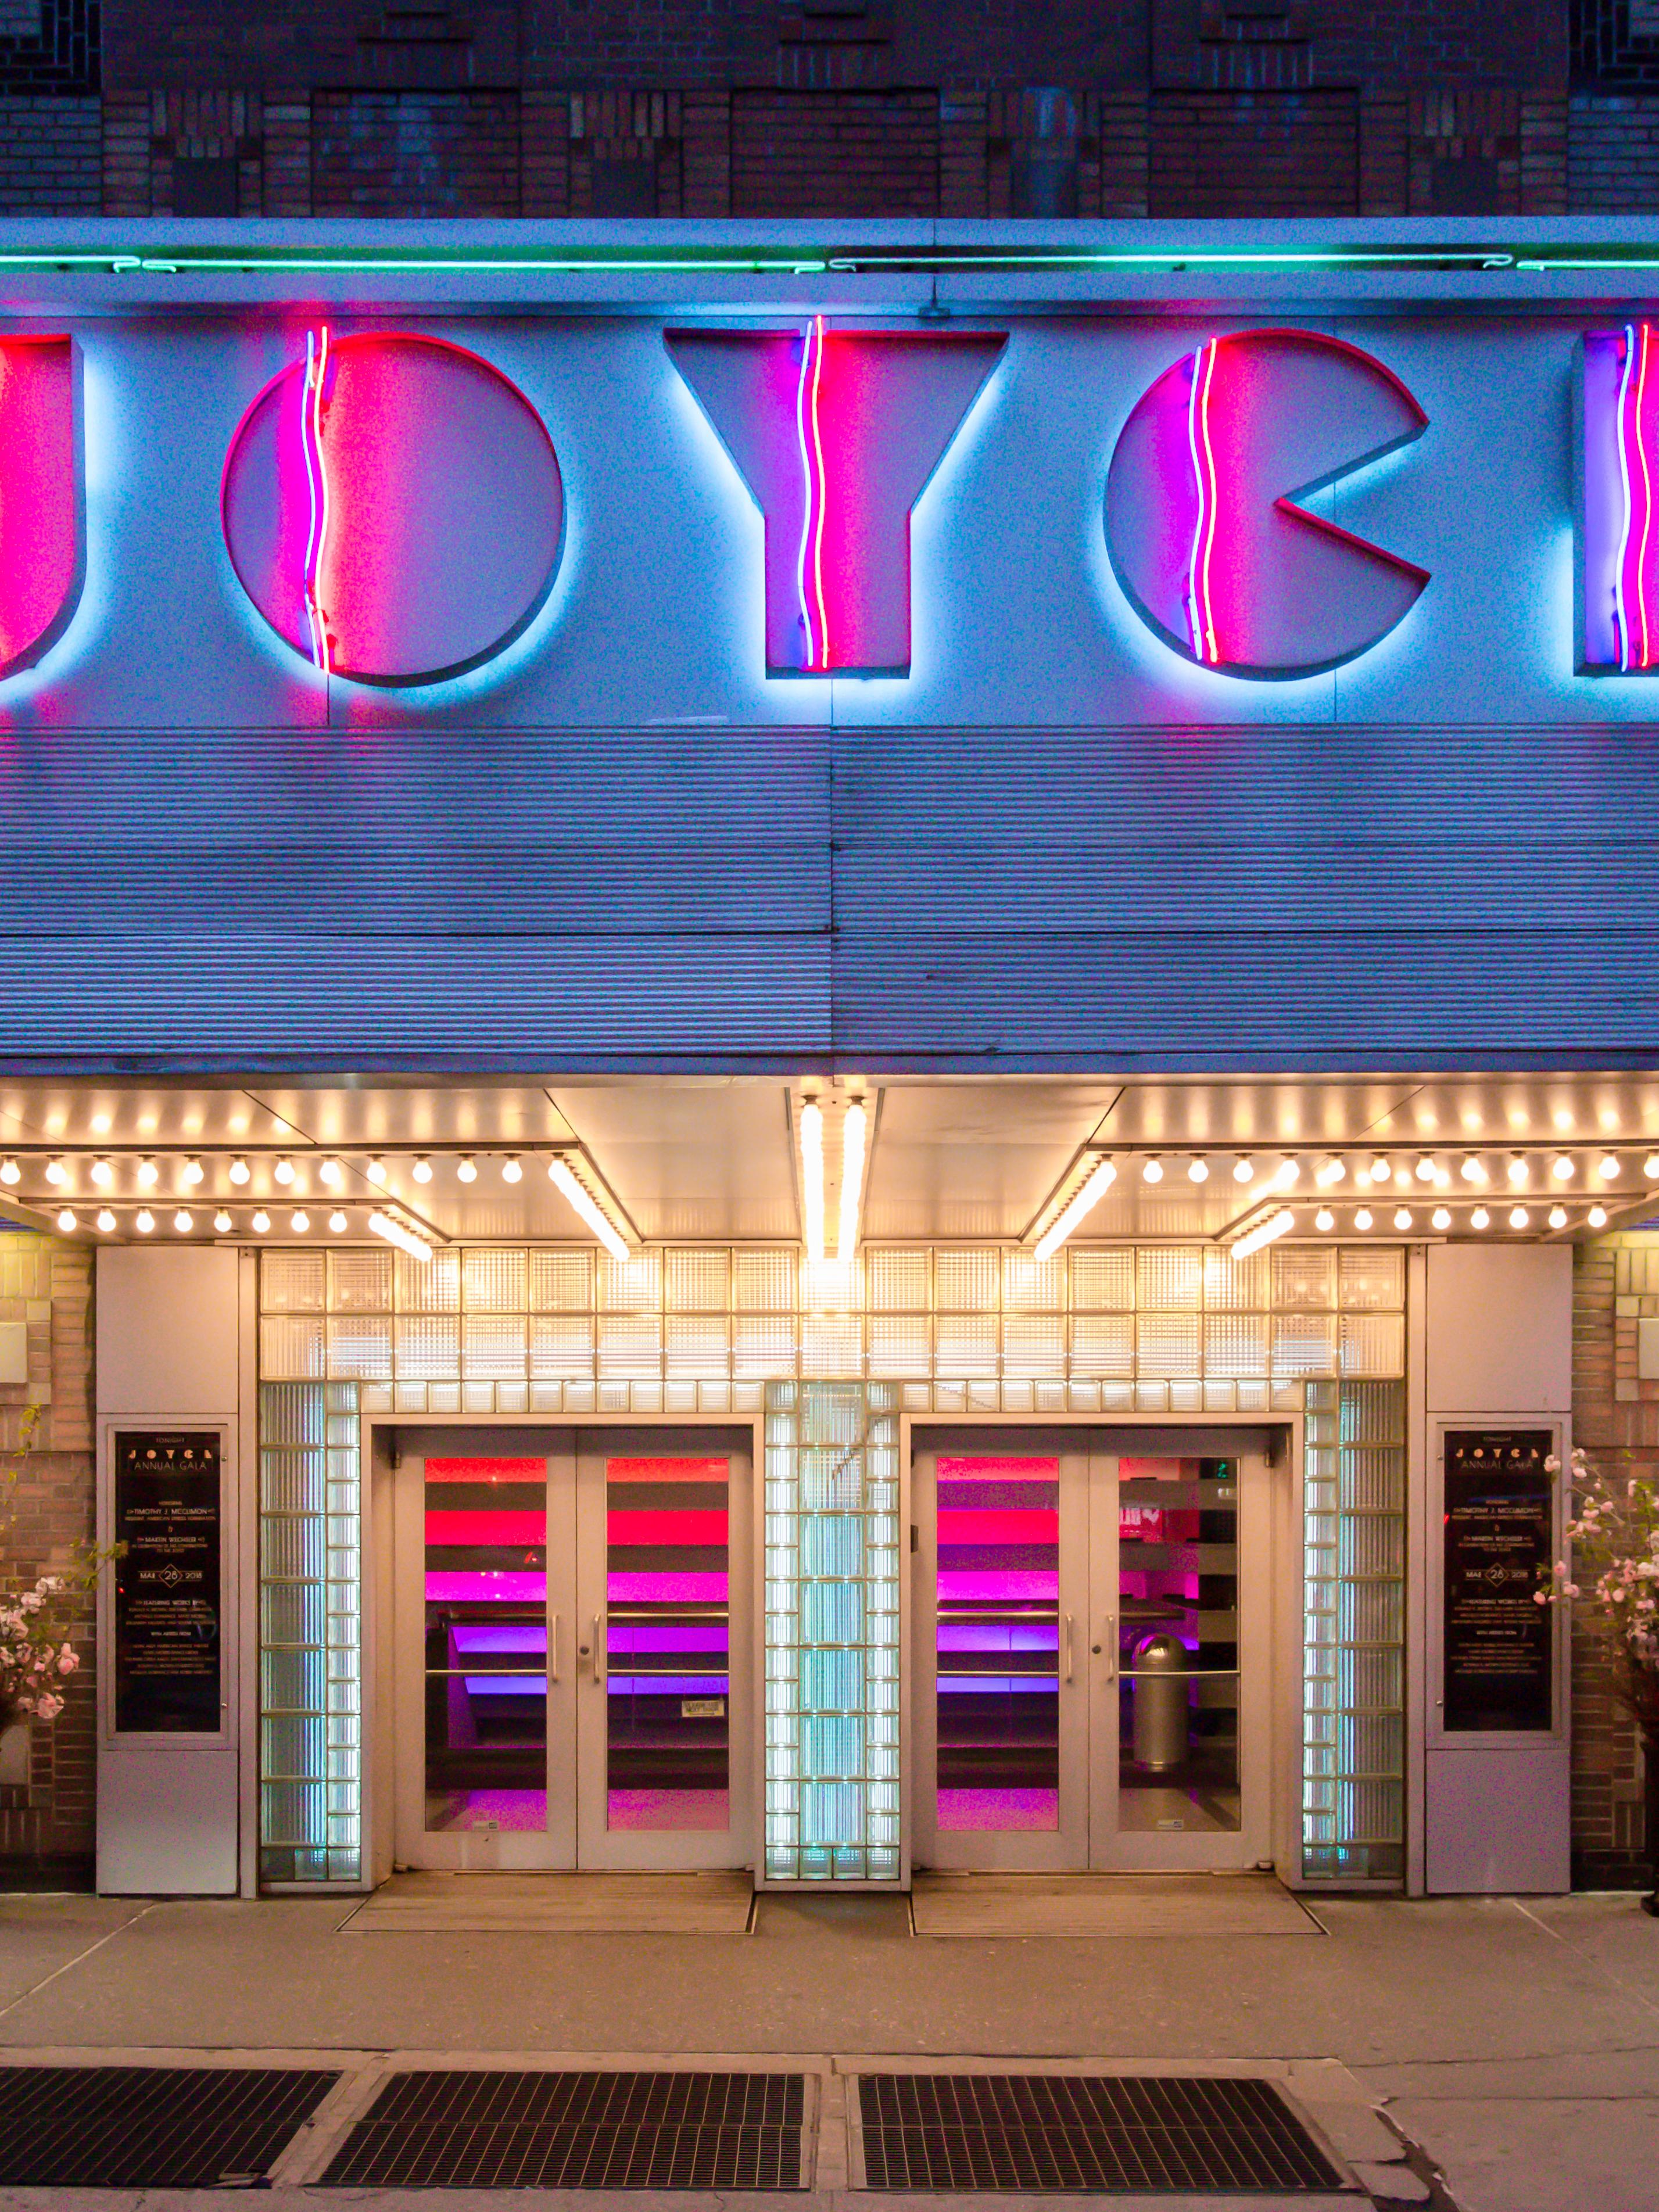 Exterior view of the Joyce Theater building